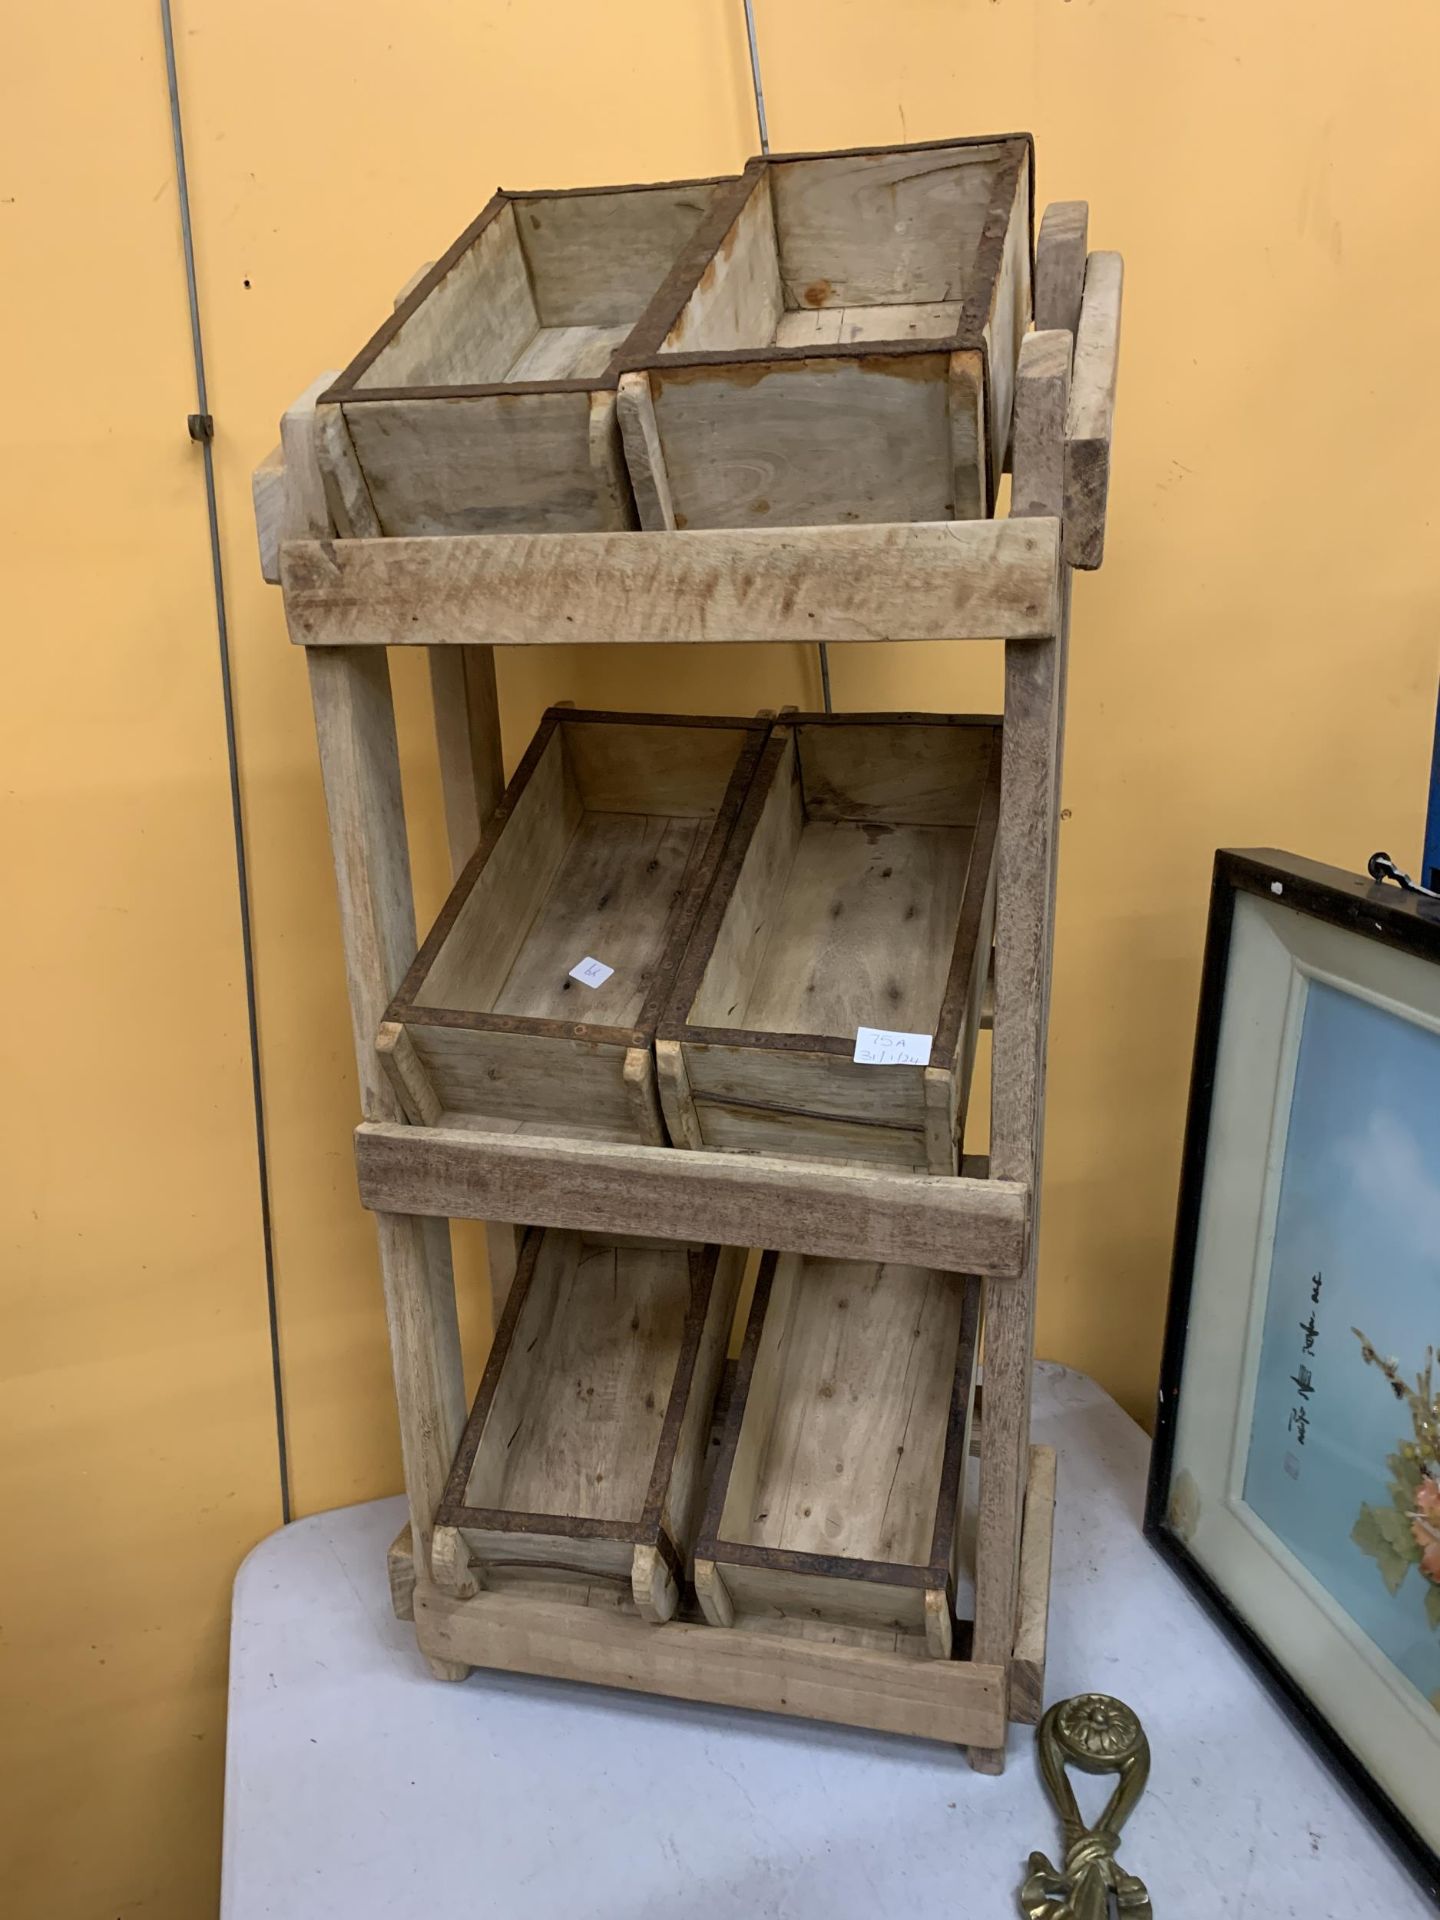 A WOODEN STORAGE RACK WITH SIX BRICK MOULD BOXES